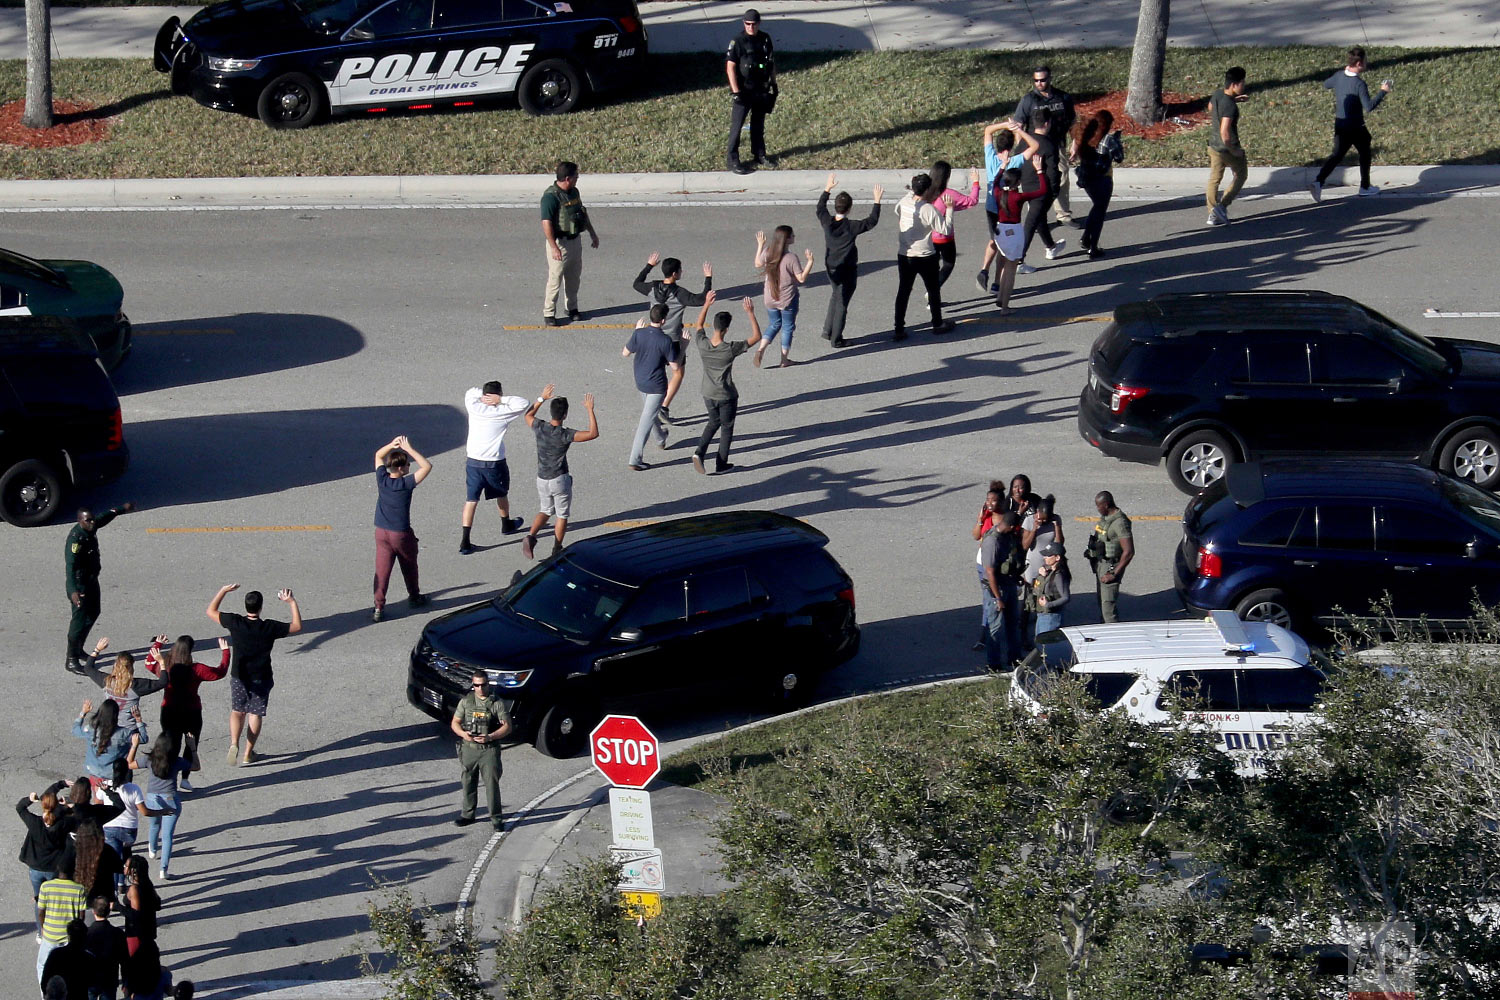  Students hold their hands in the air as they are evacuated by police from Marjory Stoneman Douglas High School in Parkland, Fla., on Feb. 14, 2018, after a shooter opened fire on the campus. (Mike Stocker/South Florida Sun-Sentinel via AP) 